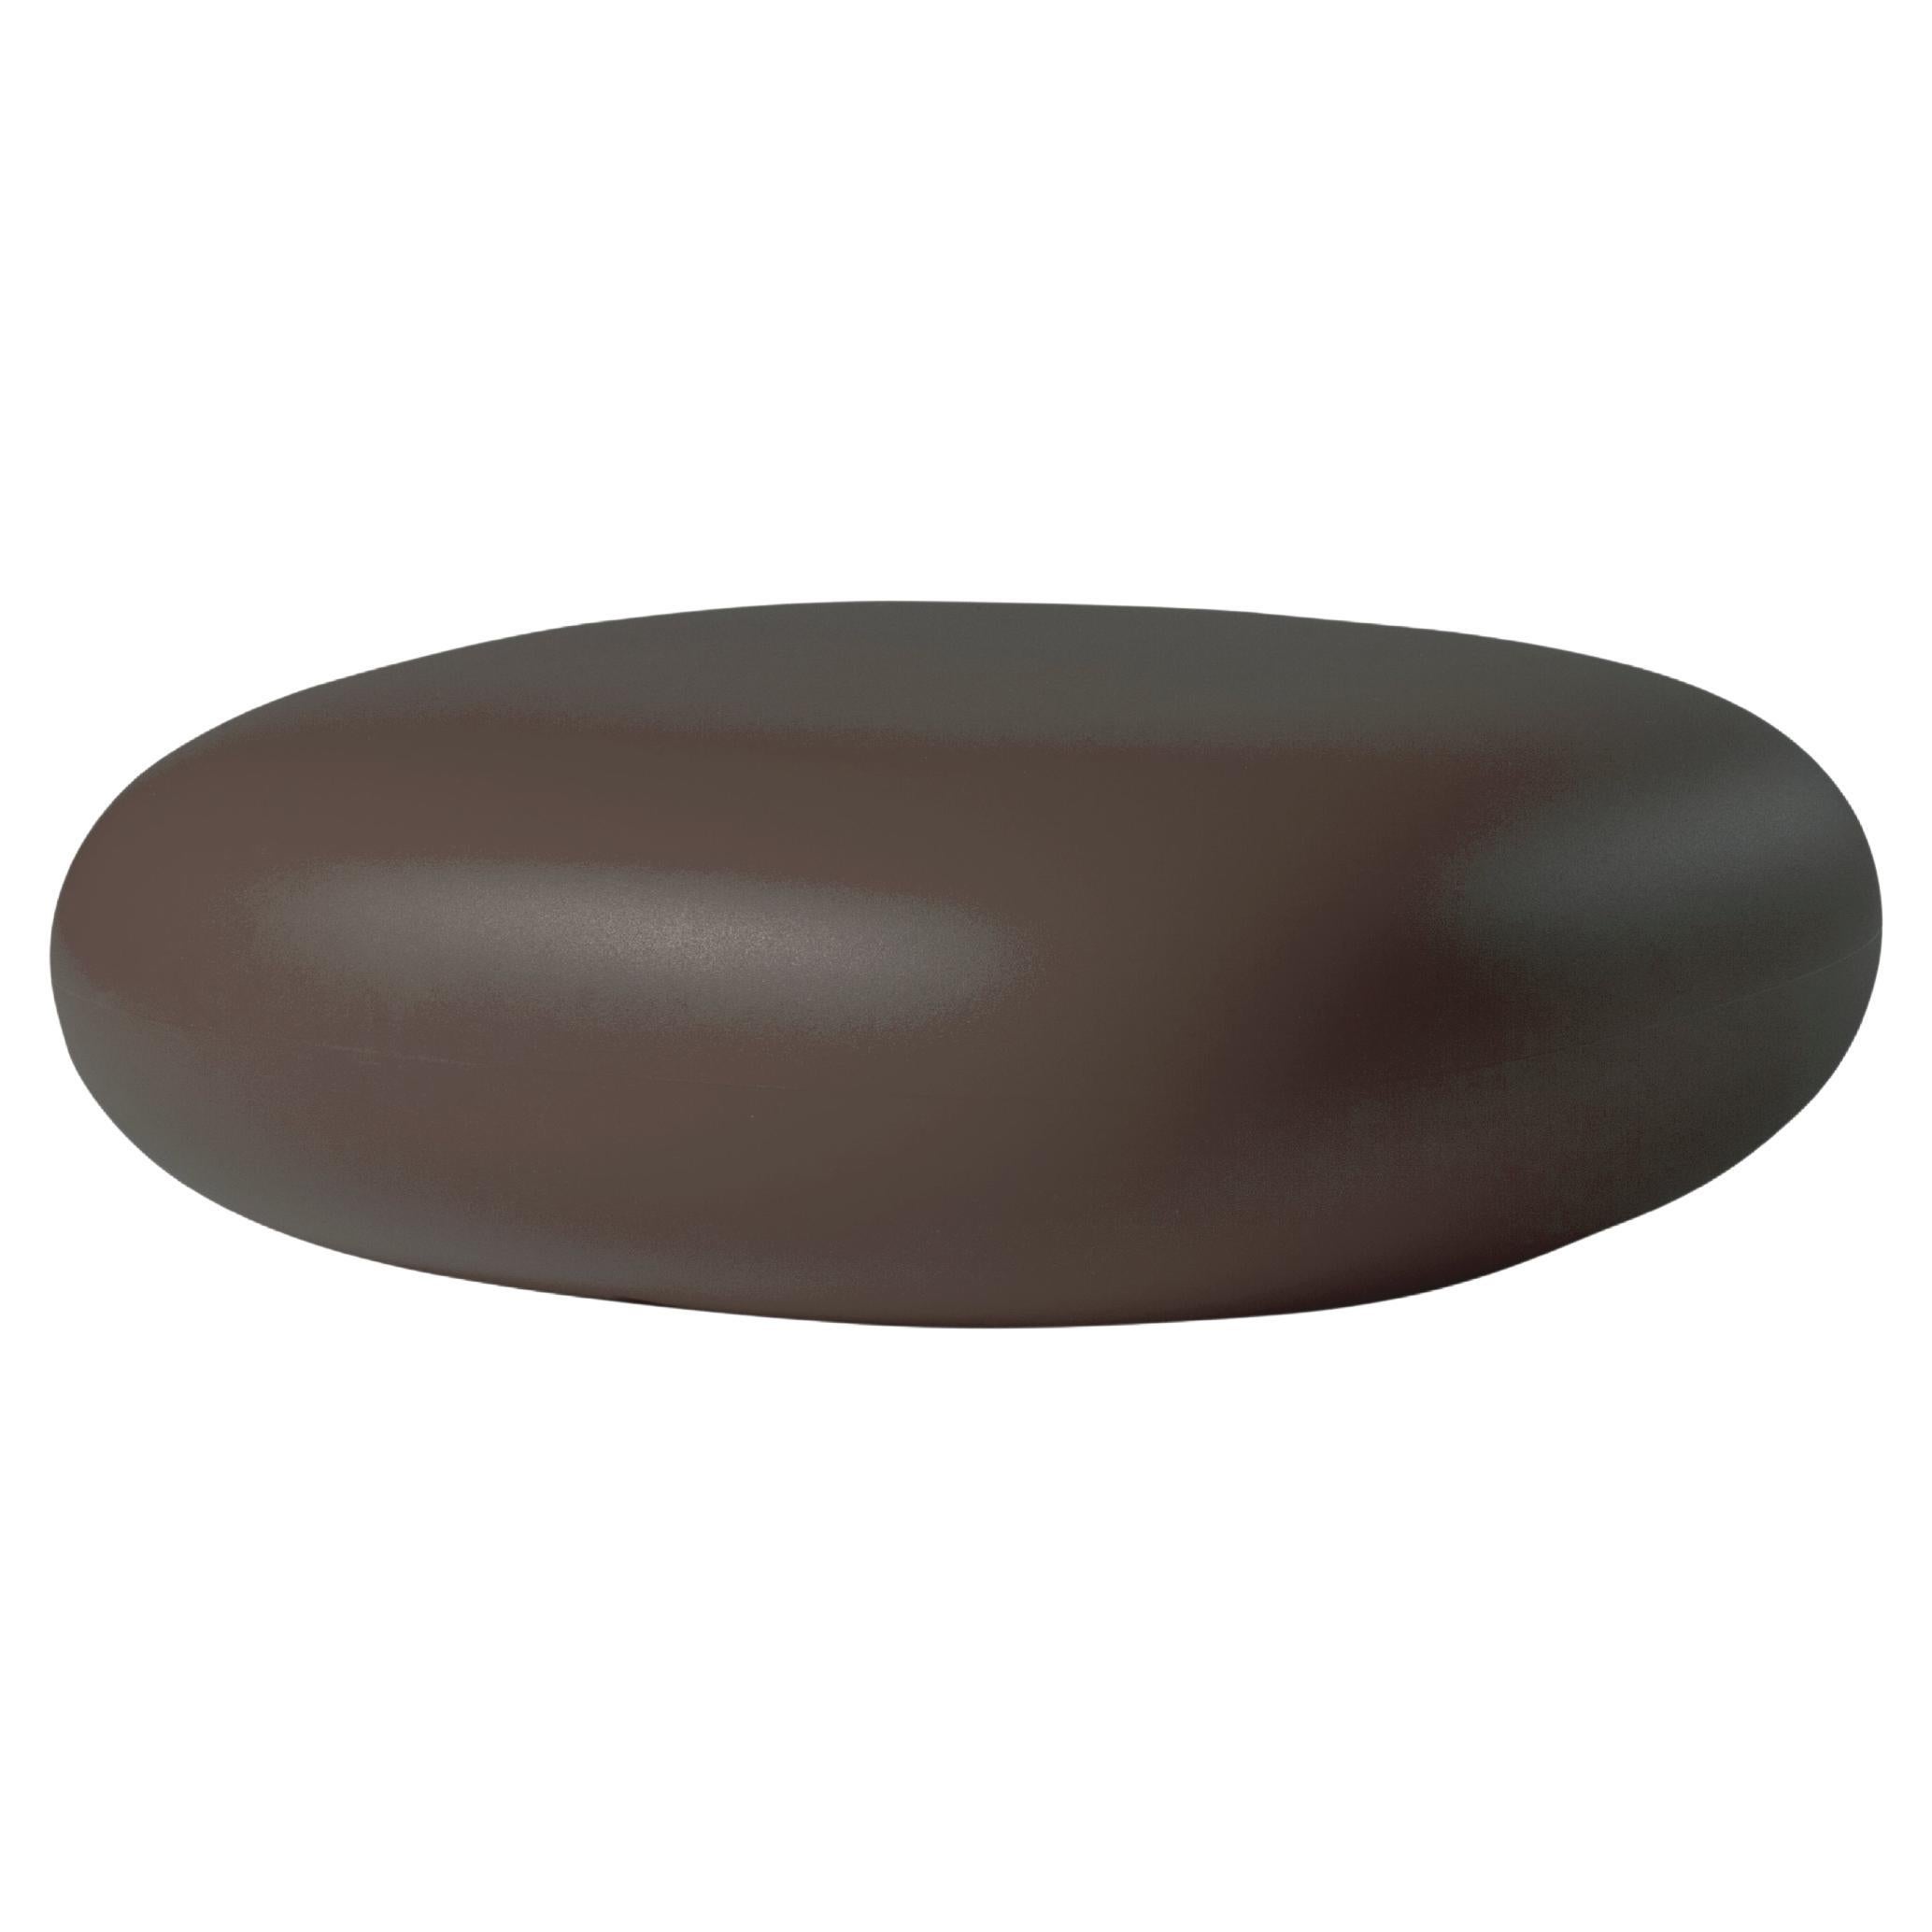 Slide Design Chubby Low Pouf in Chocolate Brown by Marcel Wanders For Sale